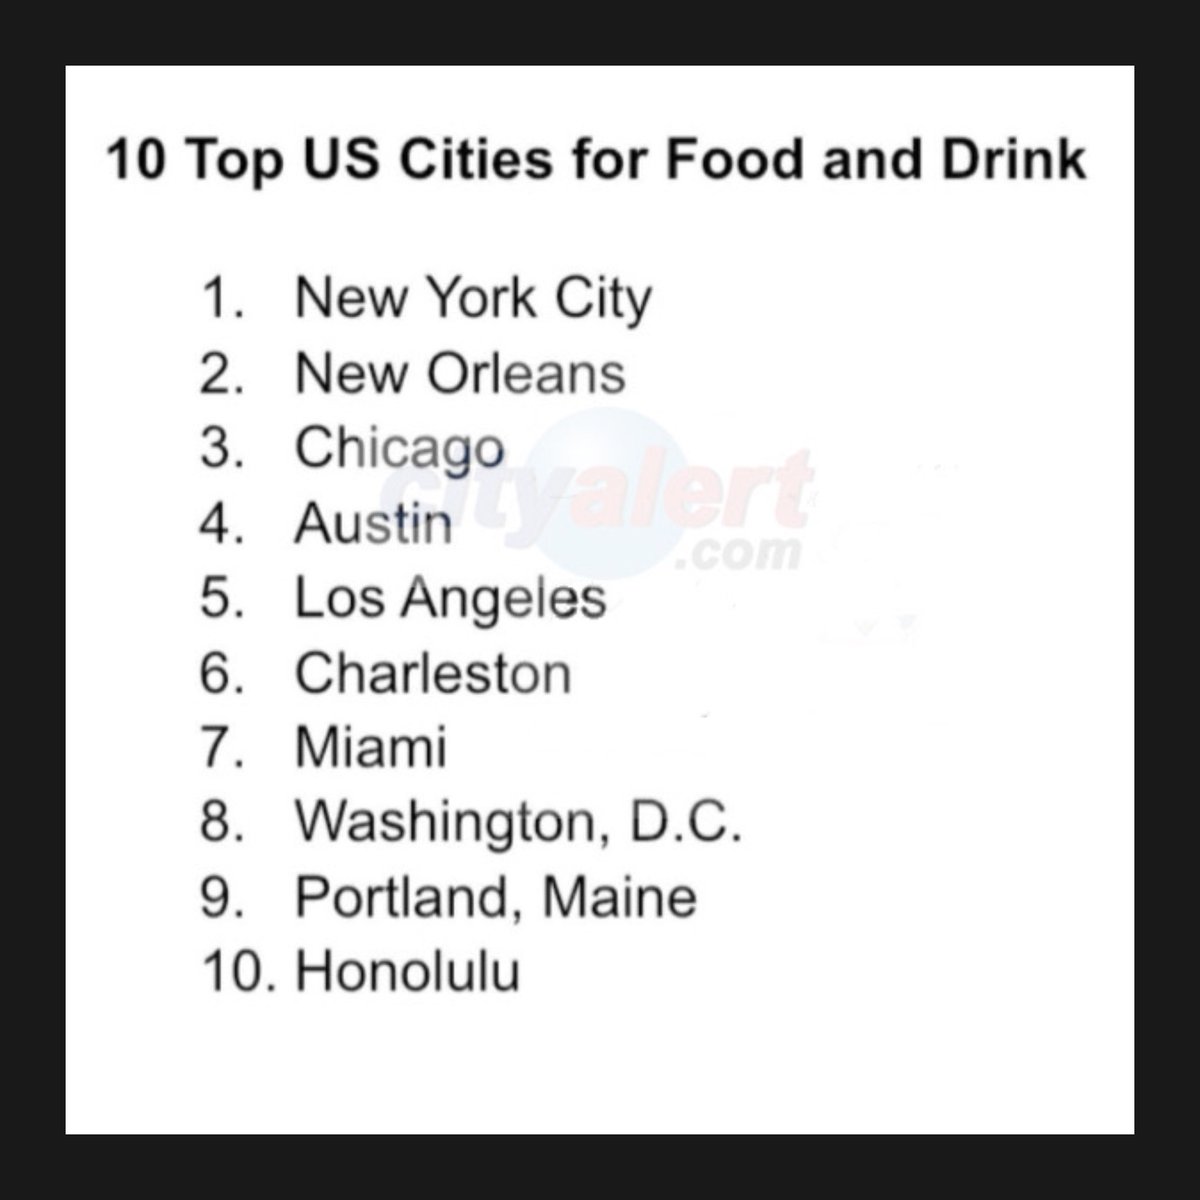 According to @foodandwine, #NewYorkCity has landed the number one spot for the best food and drinks in the United States with #NewOrleans coming in second followed by #Chicago at three. #foodexperts #bestfoodanddrinks 🍛🍸